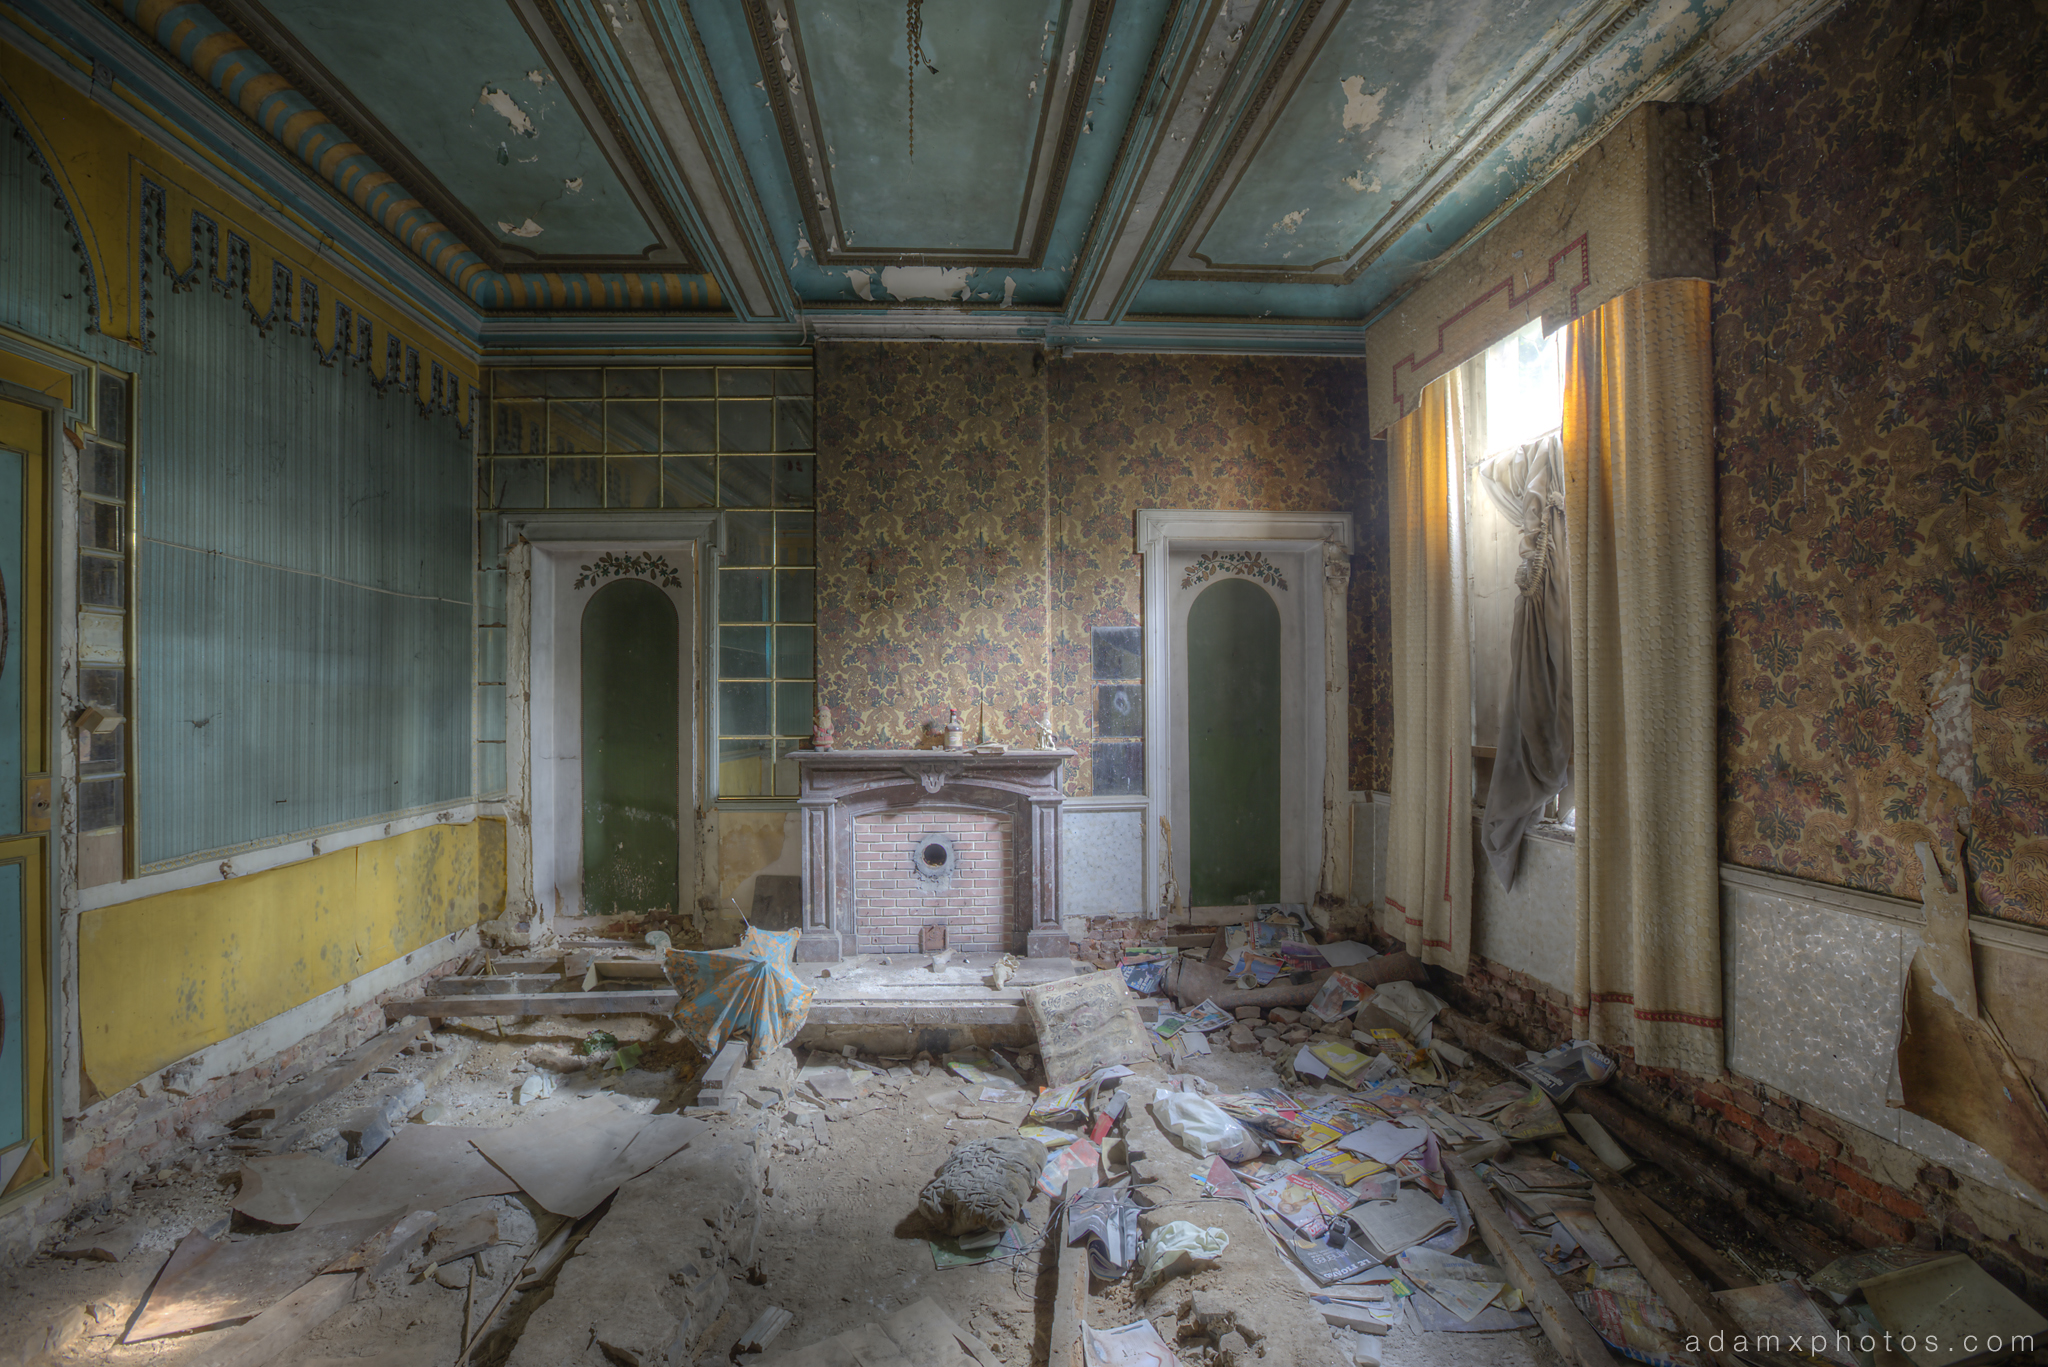 Utopia Room blue yellow colours wallpaper fireplace curtains Adam X Urbex UE Urban Exploration Belgium Chateau Congo house maison villa townhouse abandoned derelict unused empty disused decay decayed decaying grimy grime collapsing